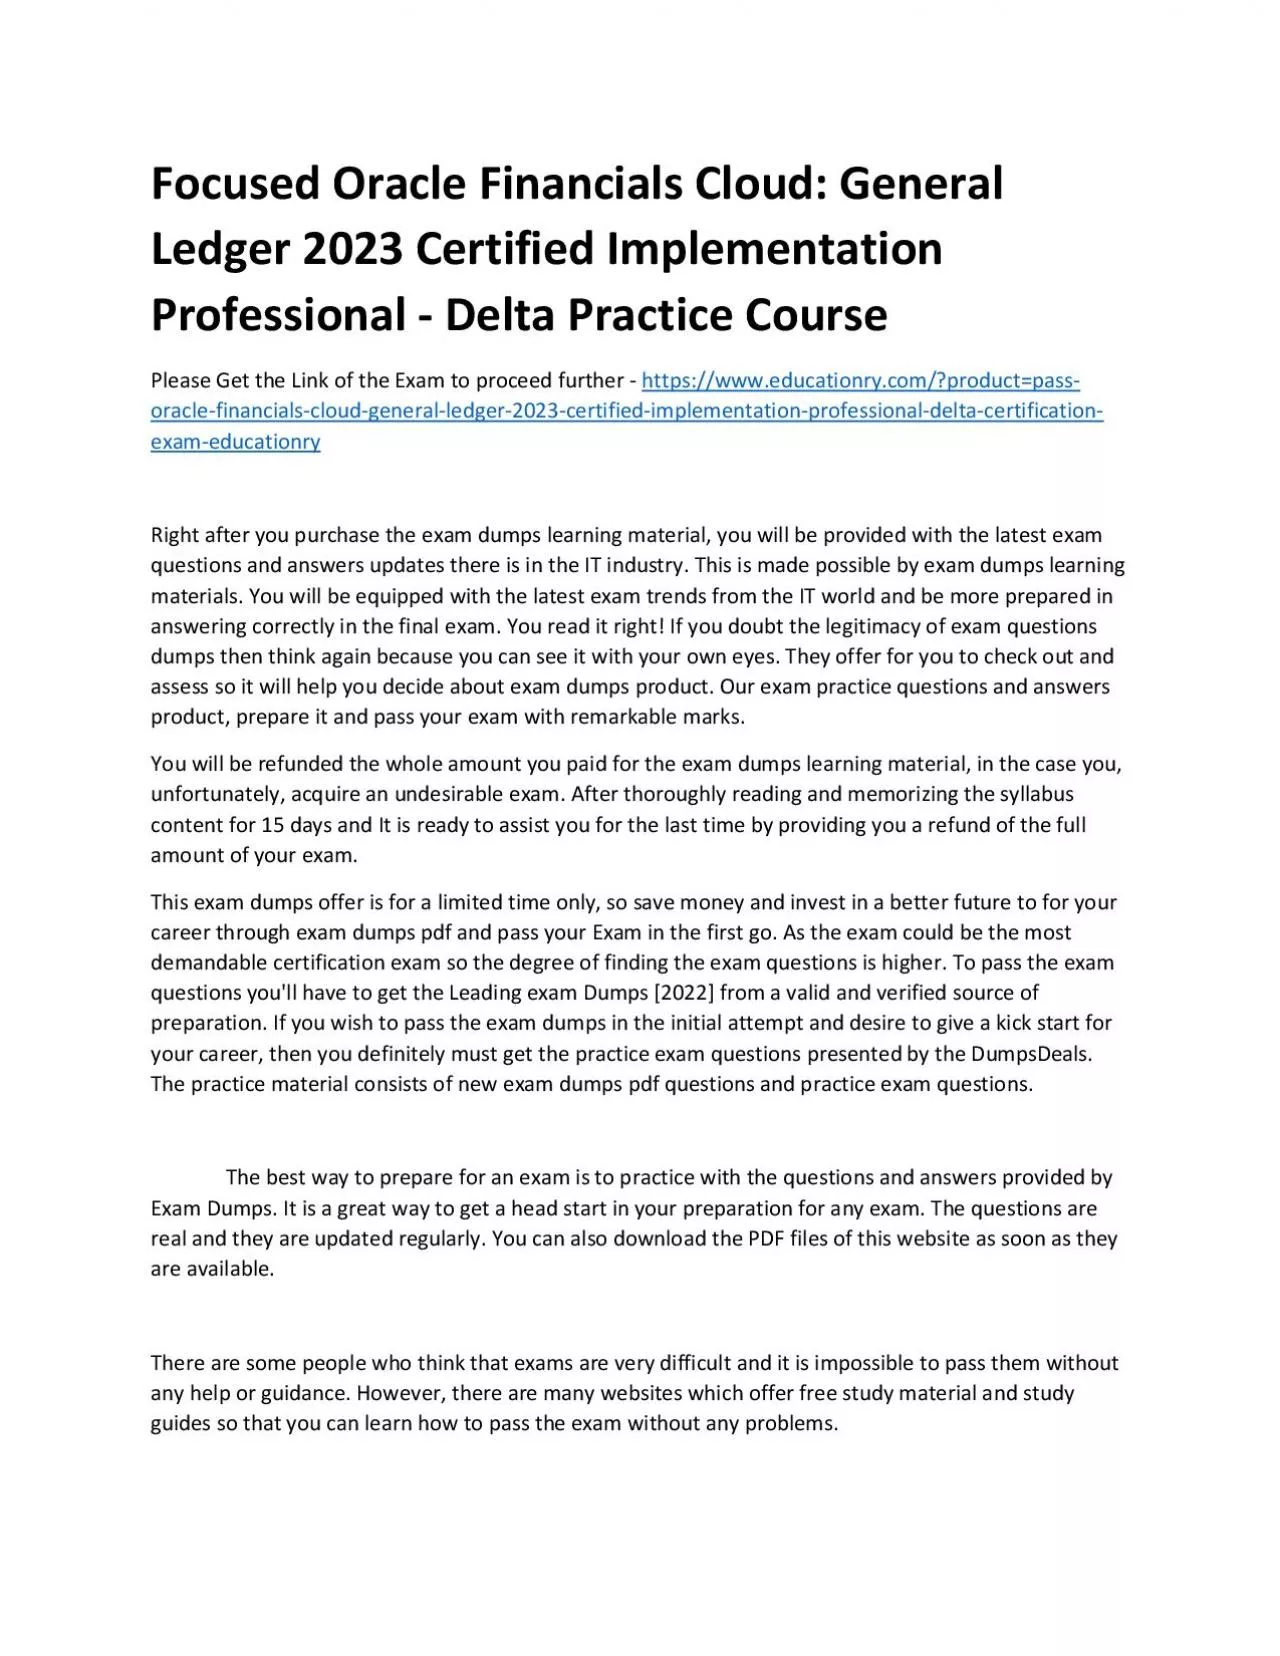 Focused Oracle Financials Cloud: General Ledger 2023 Certified Implementation Professional